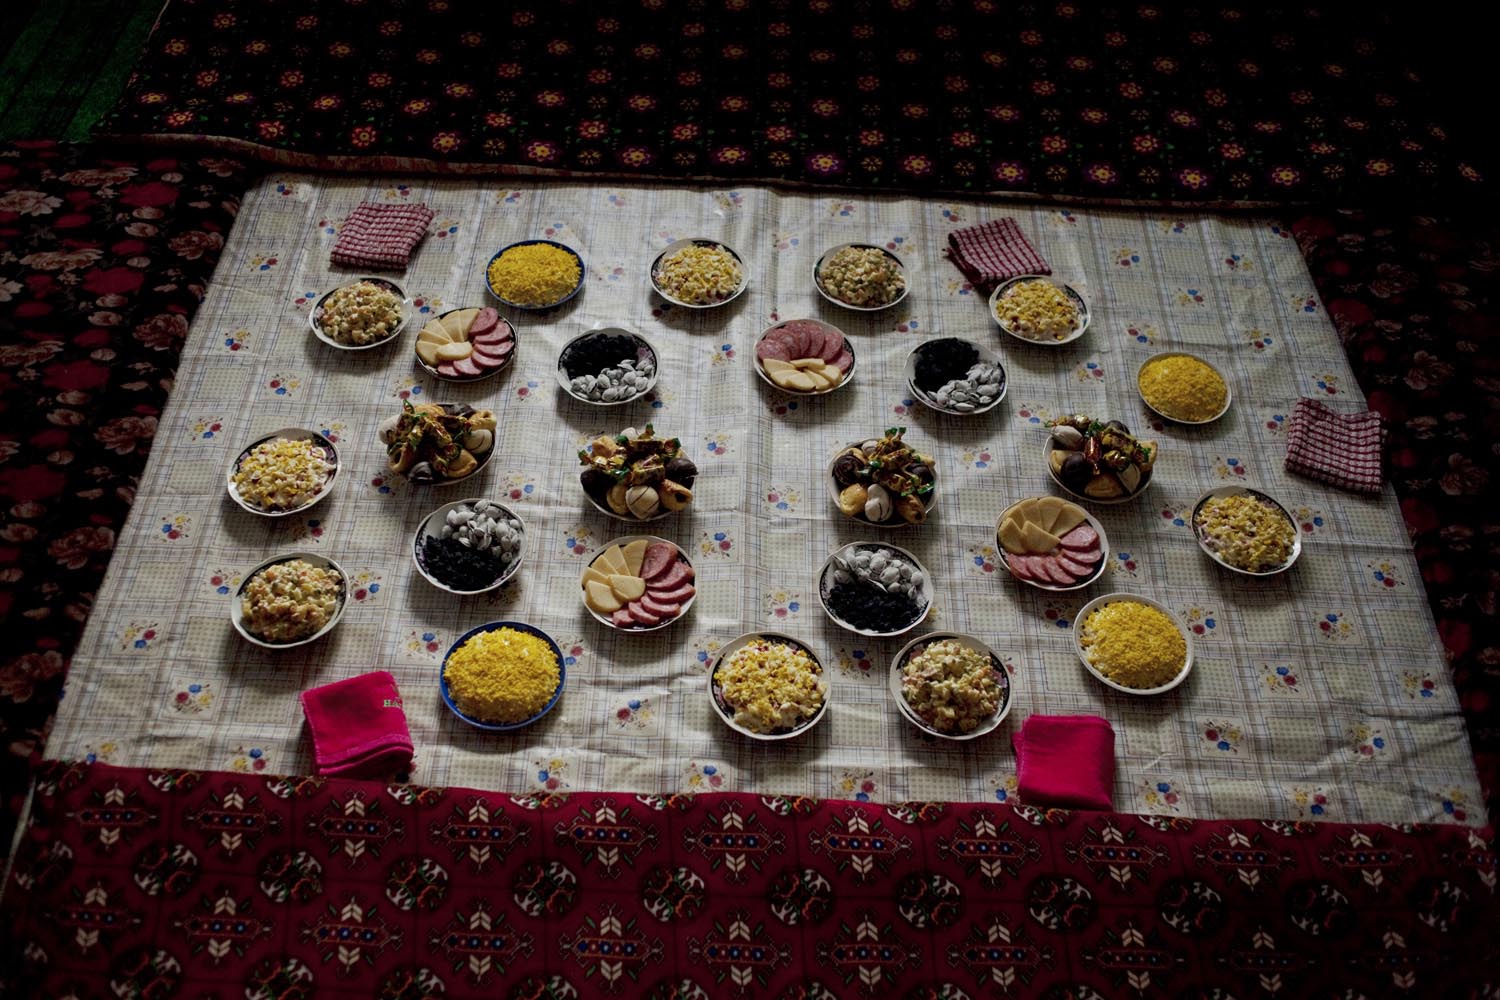 Food to be served at a birthday party